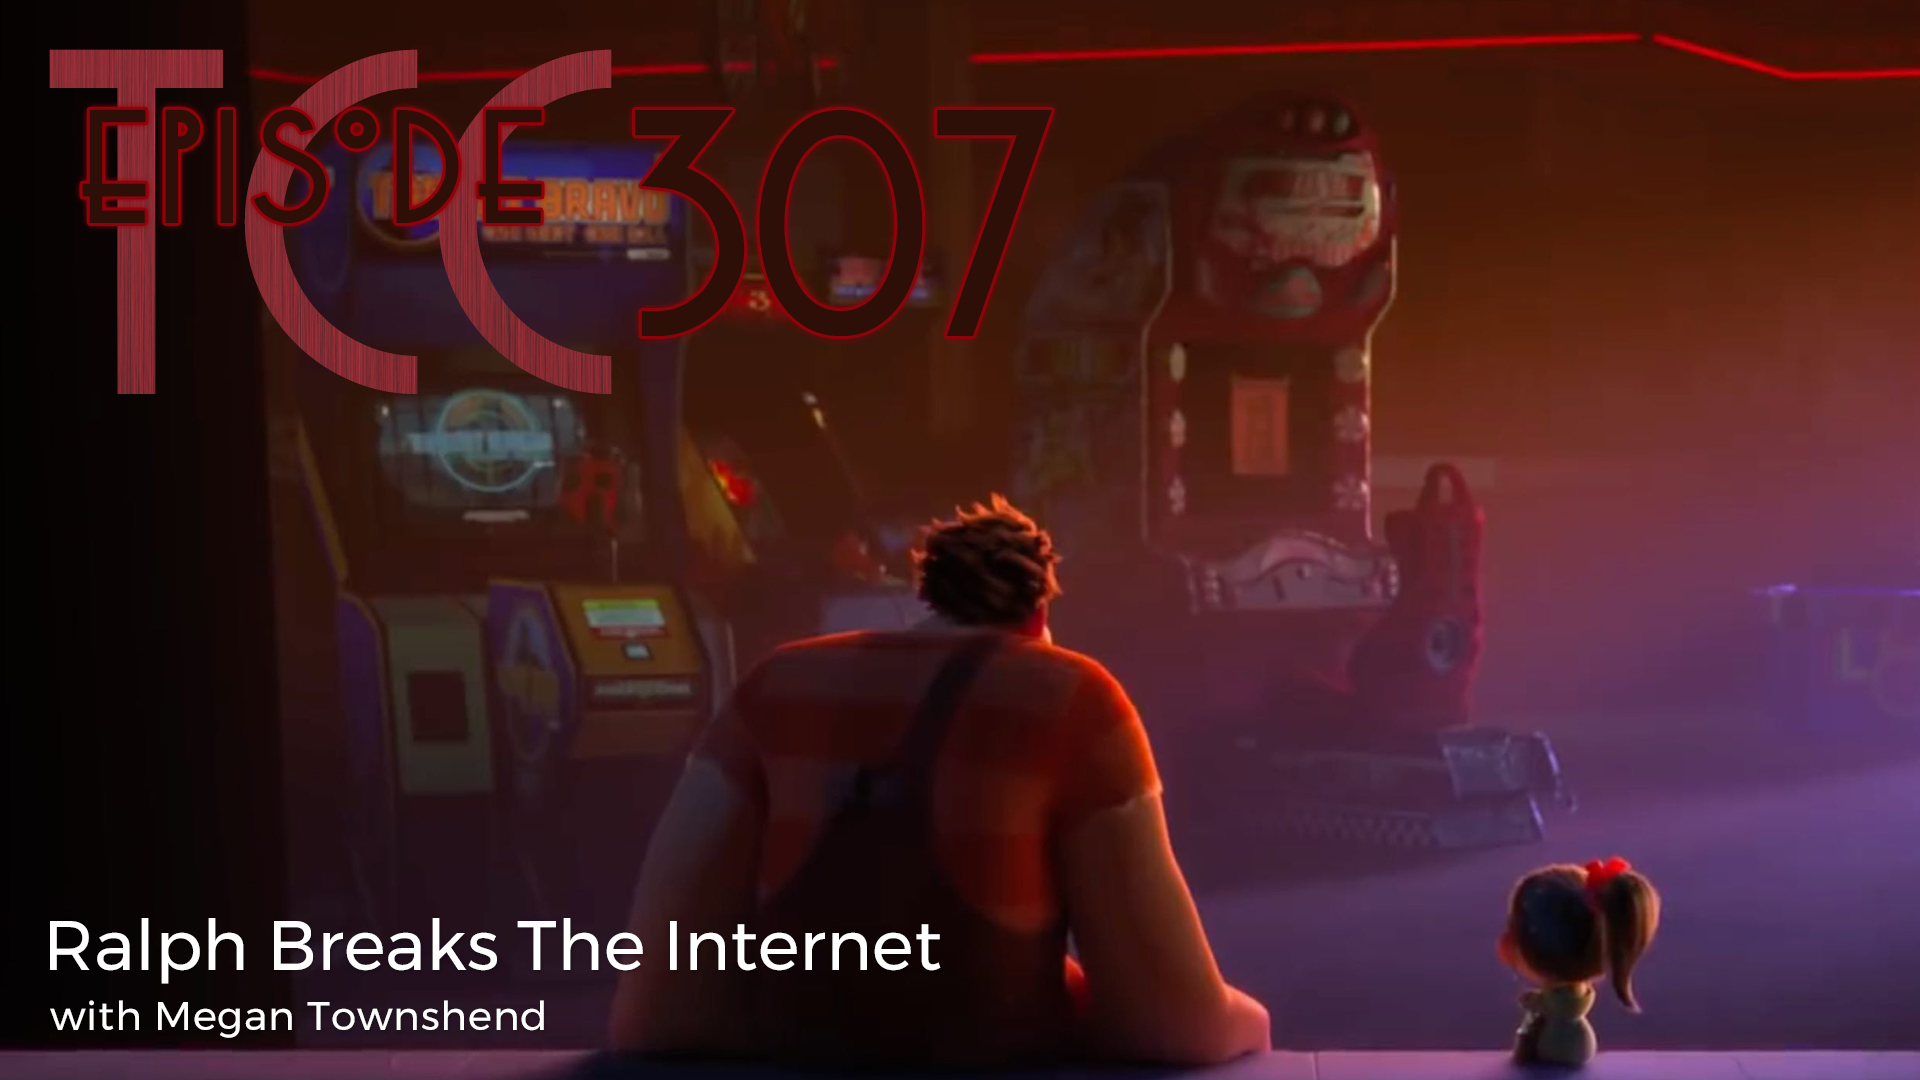 The Citadel Cafe 307: Ralph Breaks The Internet